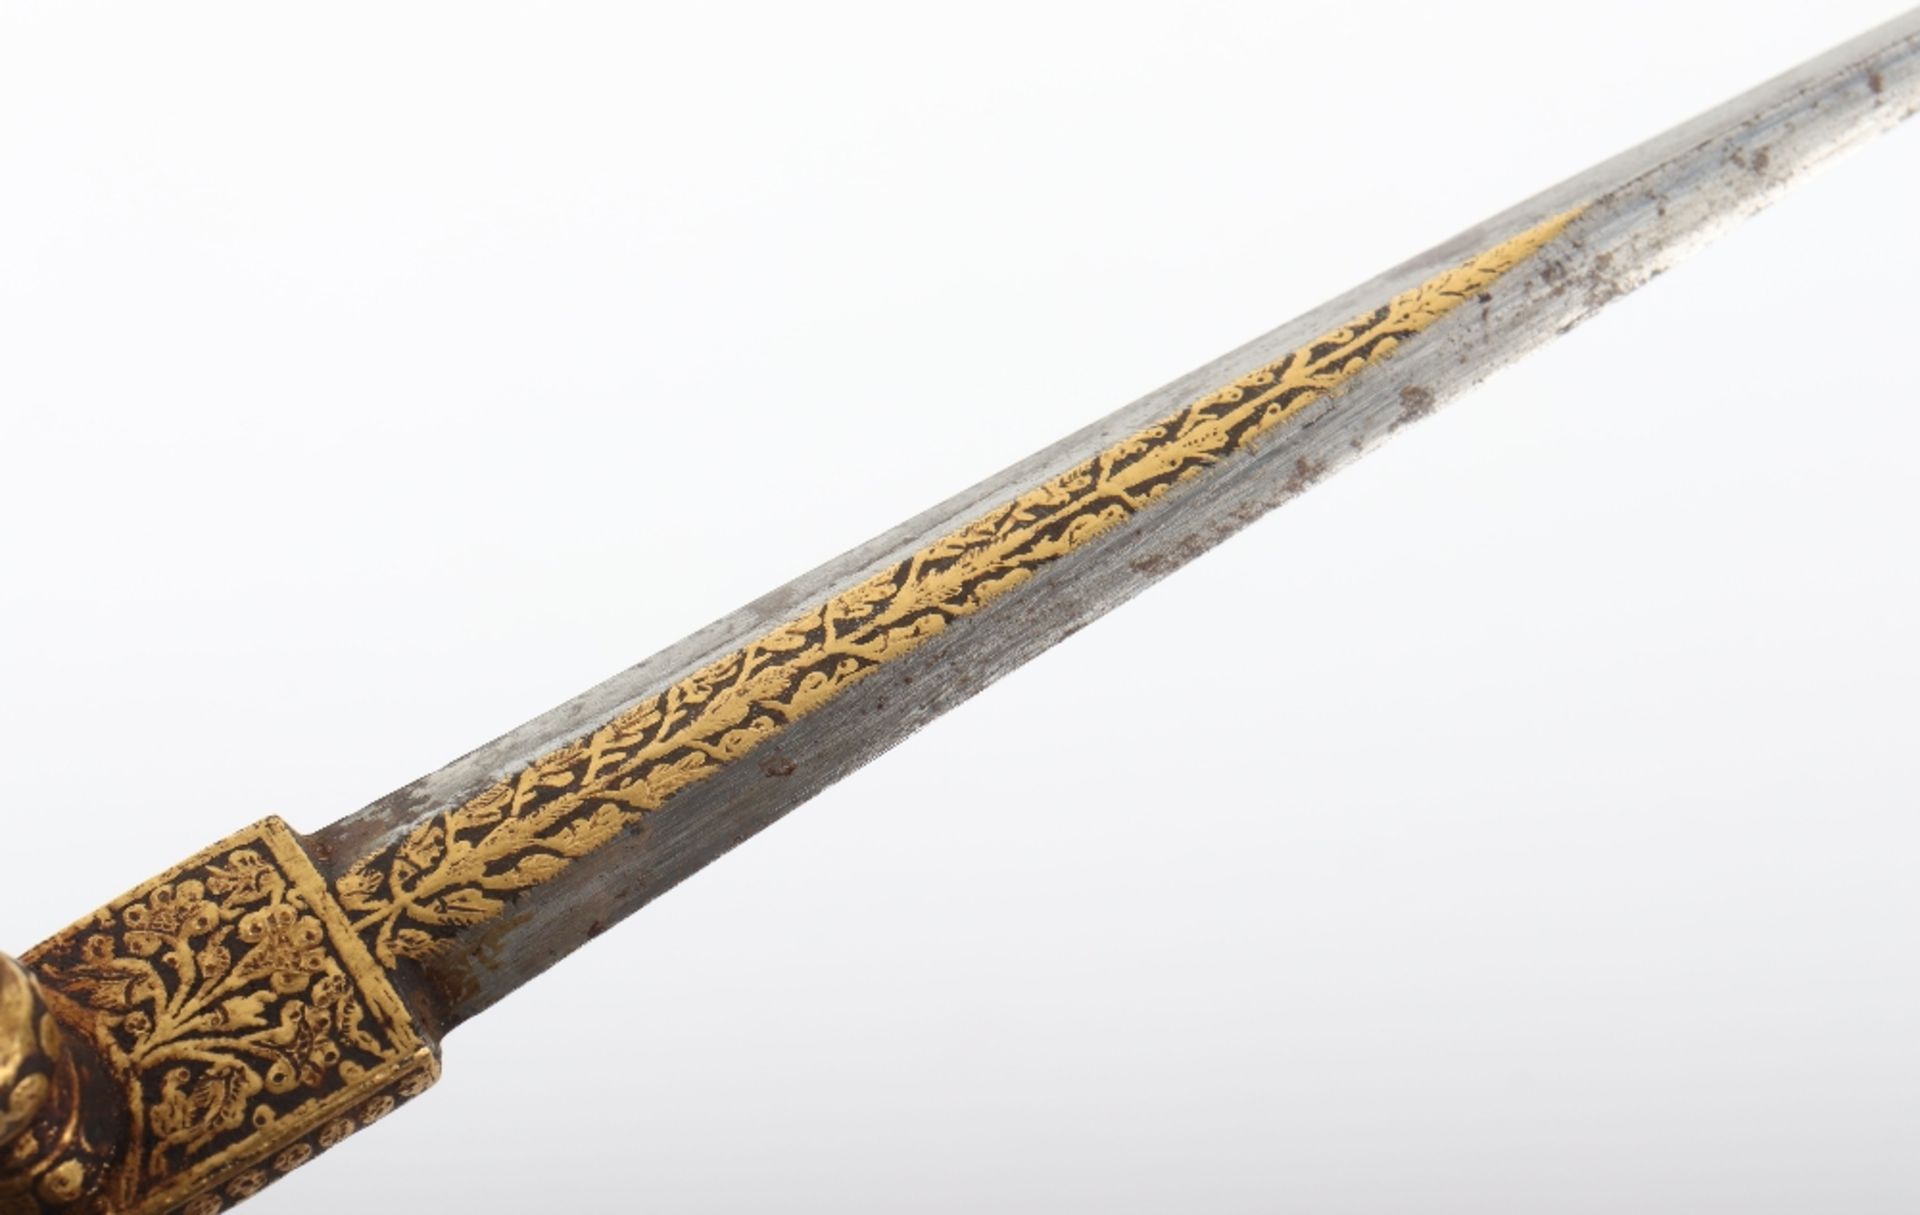 Rare Indian Bayonet Sangin Intended to be Bound to a Matchlock Gun Torador, 18th or 19th Century - Image 14 of 16